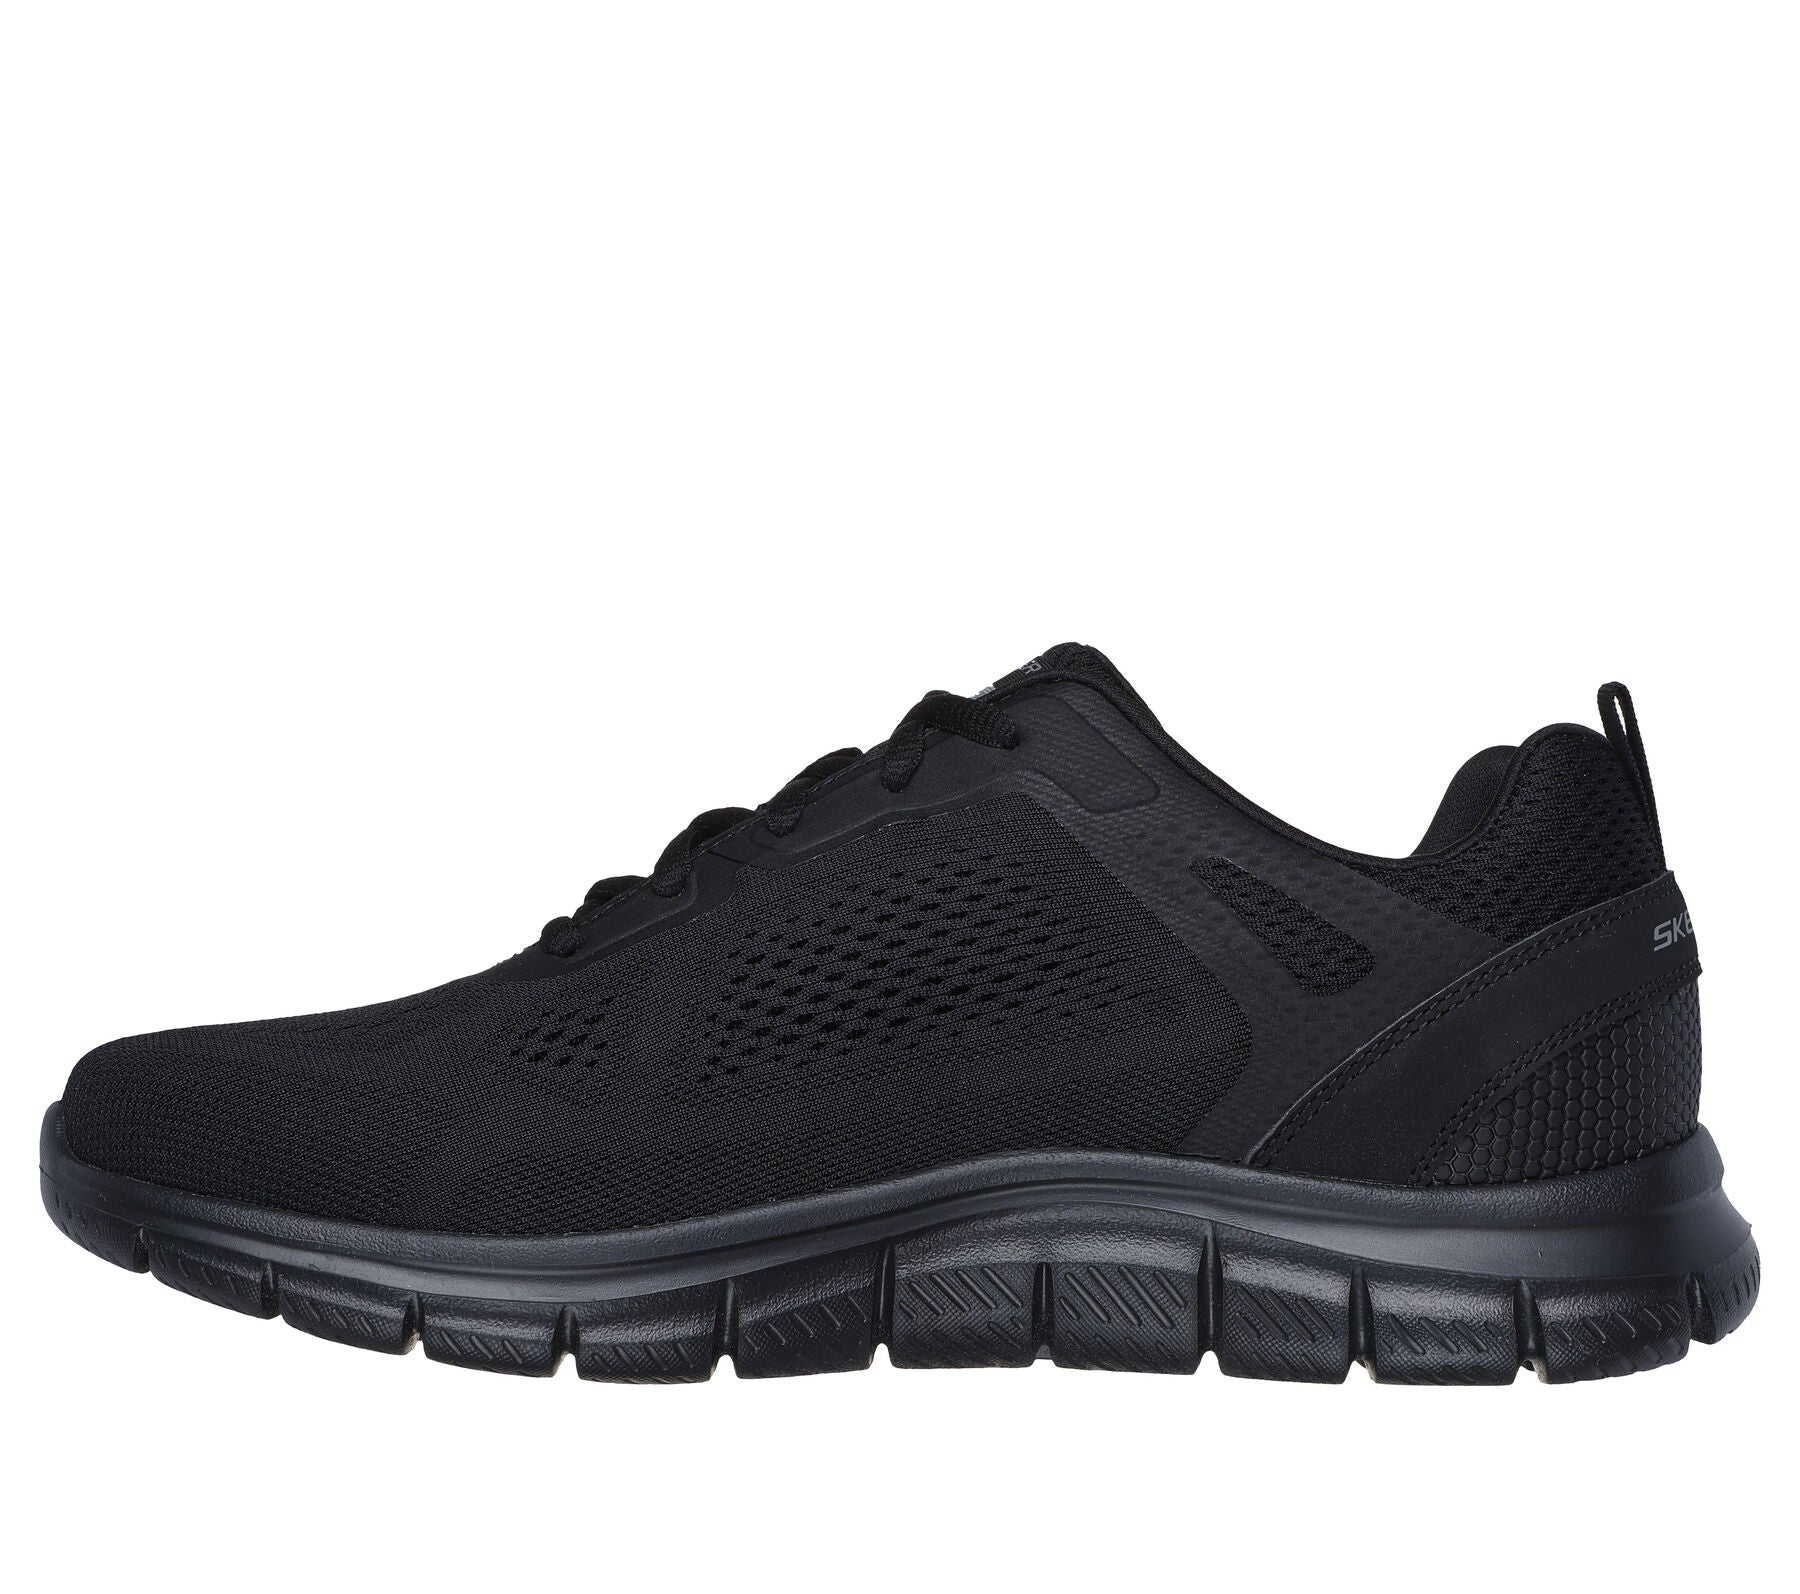 Detailed view of the all-black Skechers logo on the vegan trainer.